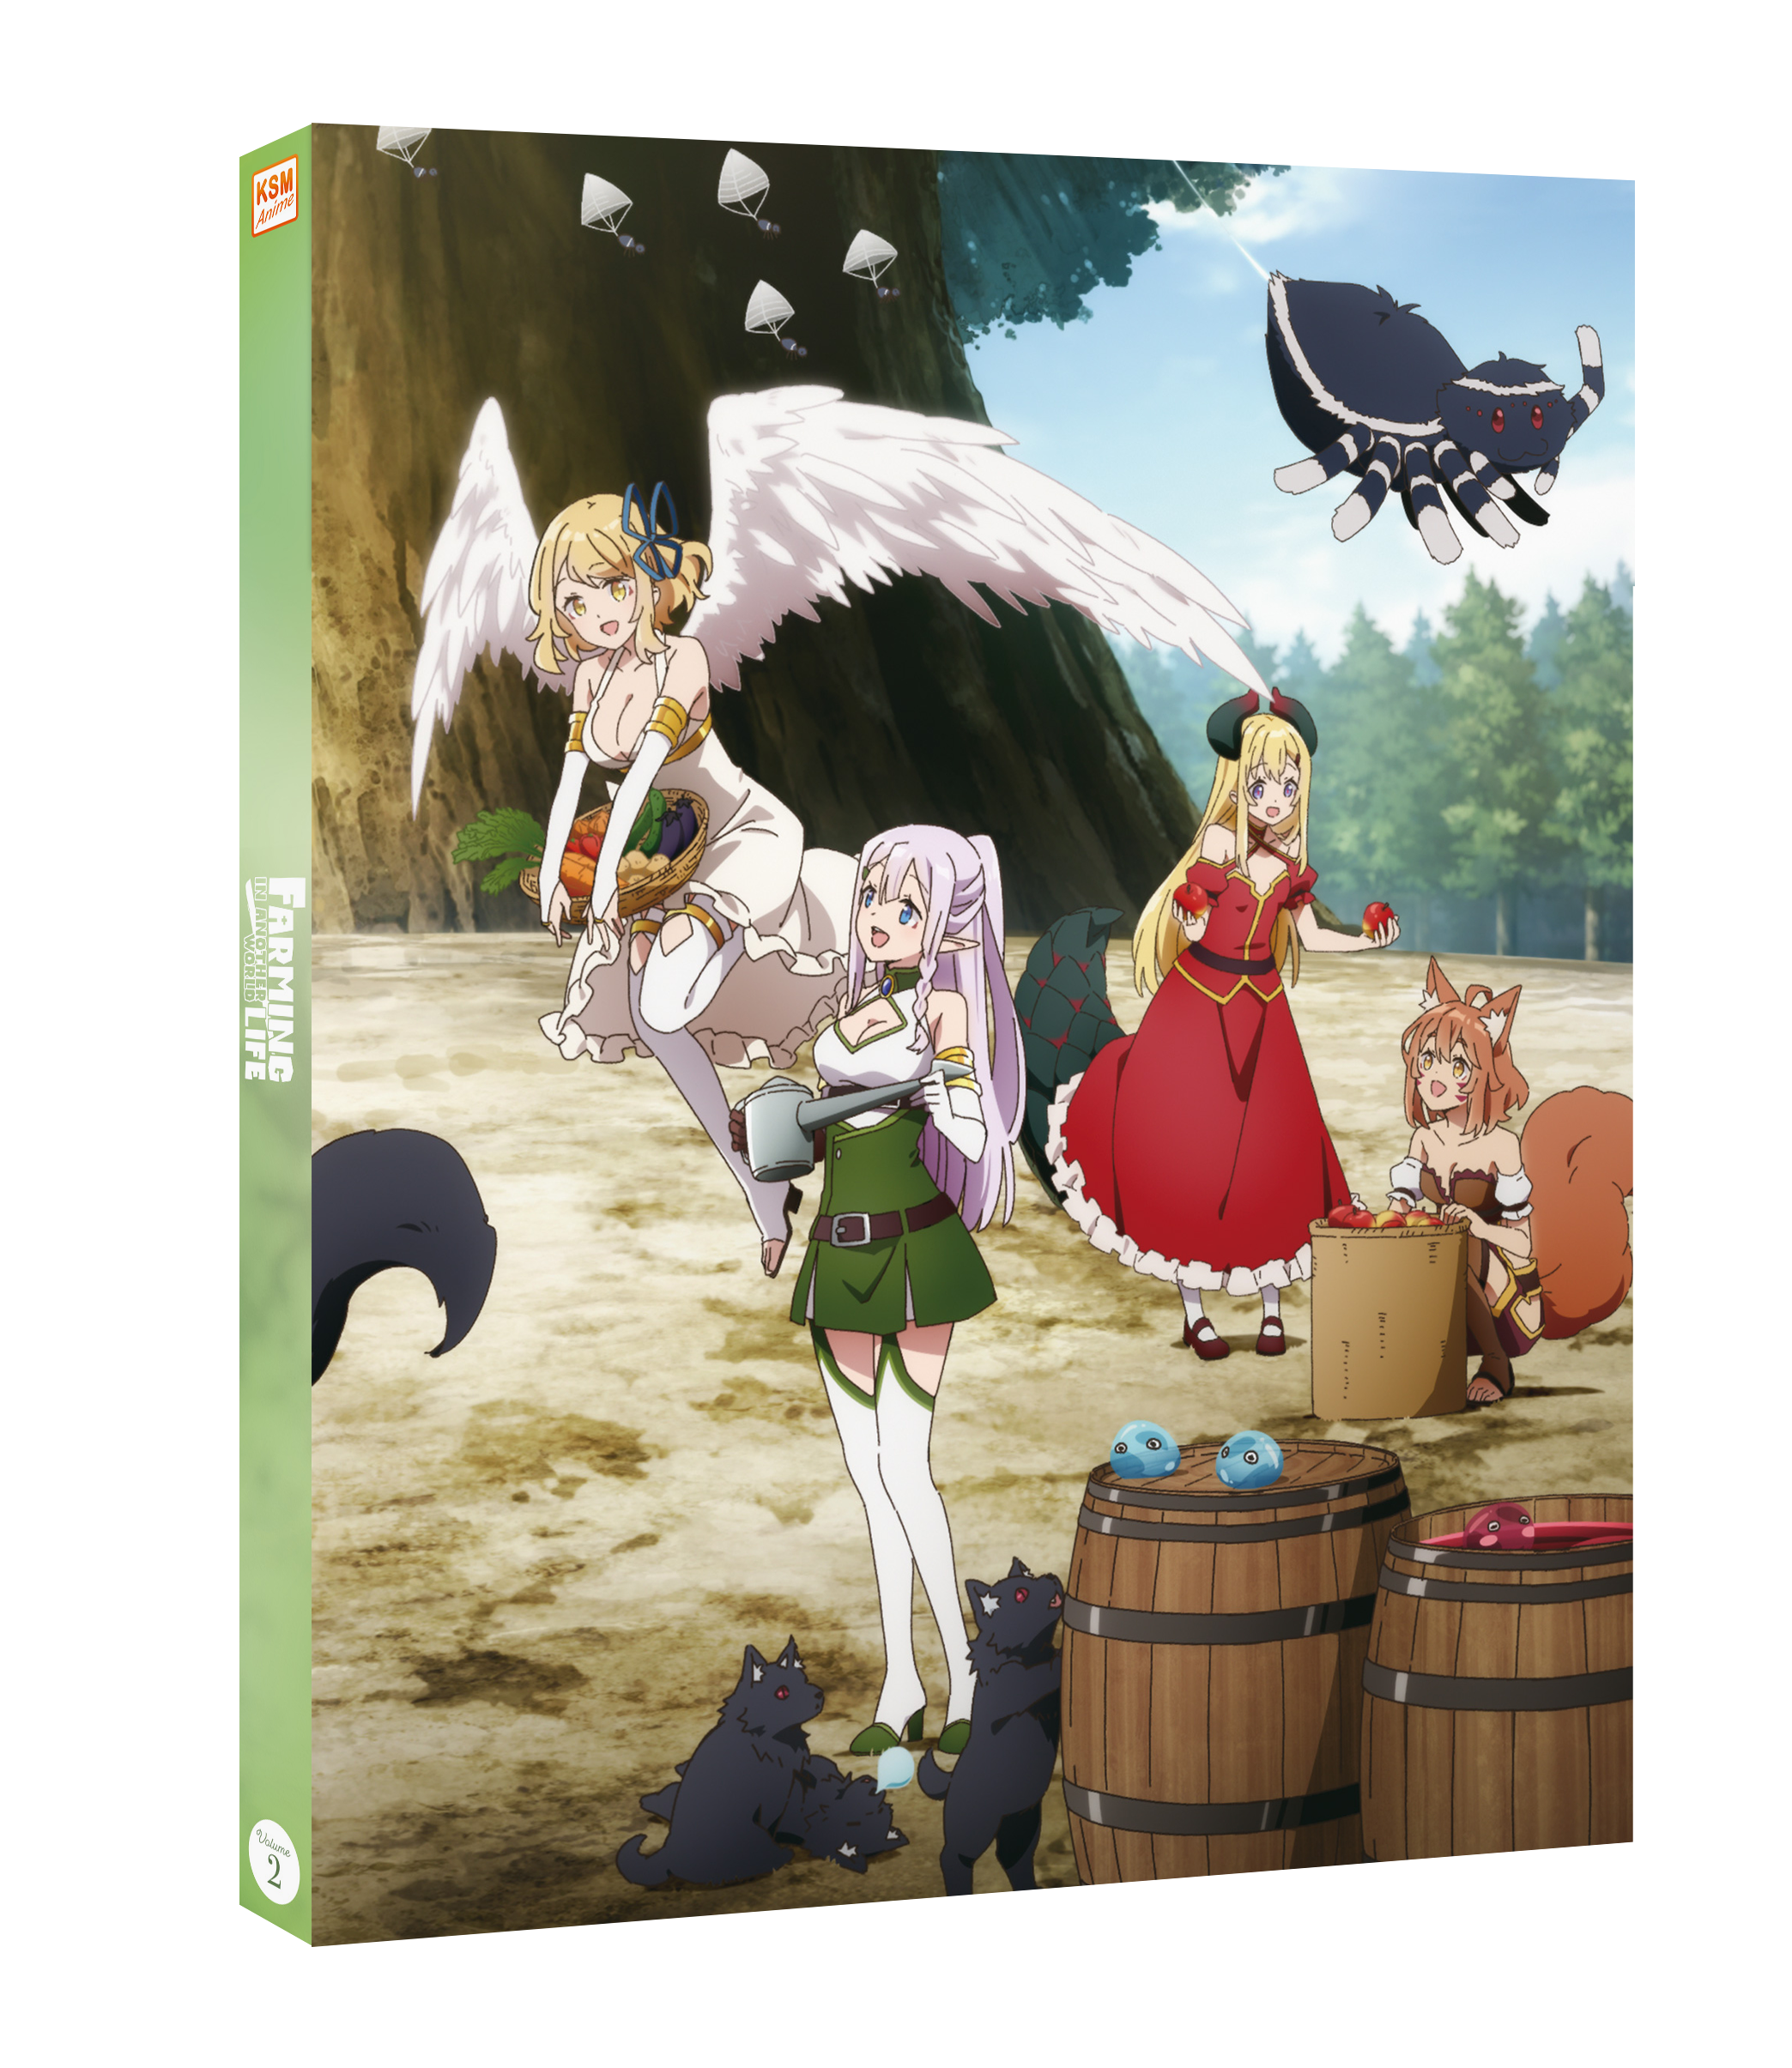 Farming Life in another World - Limited Hero Edition - Vol. 2: Ep. 7-12 [Blu-ray] Image 3